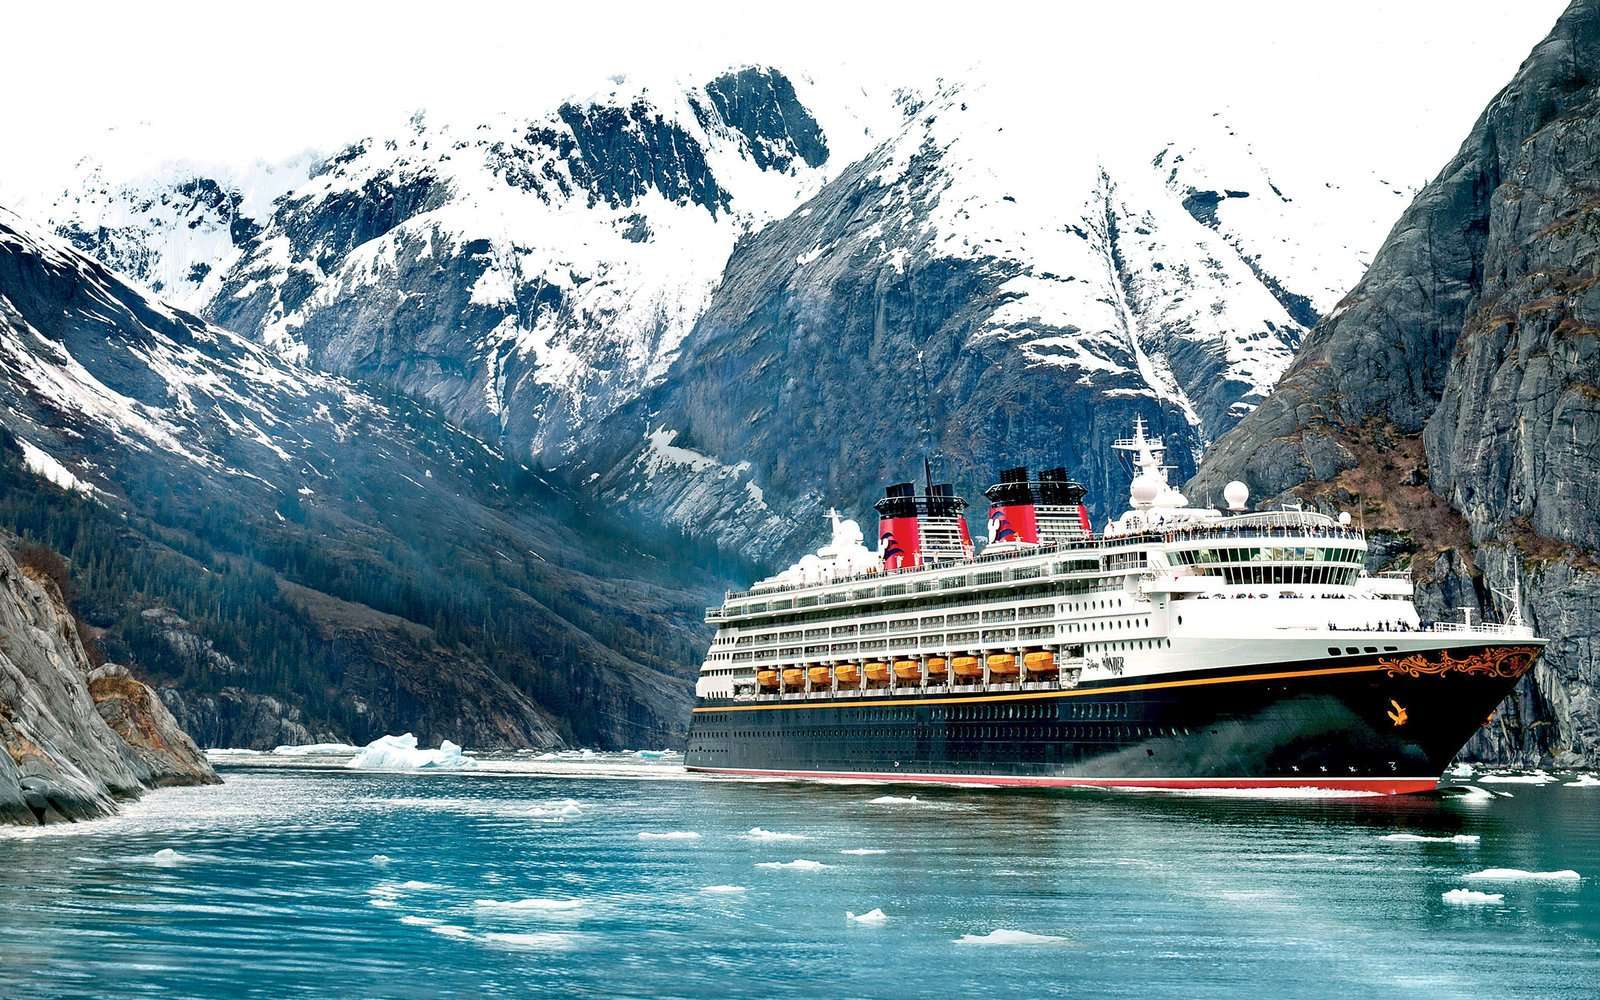 The Best Cruise Lines for Families